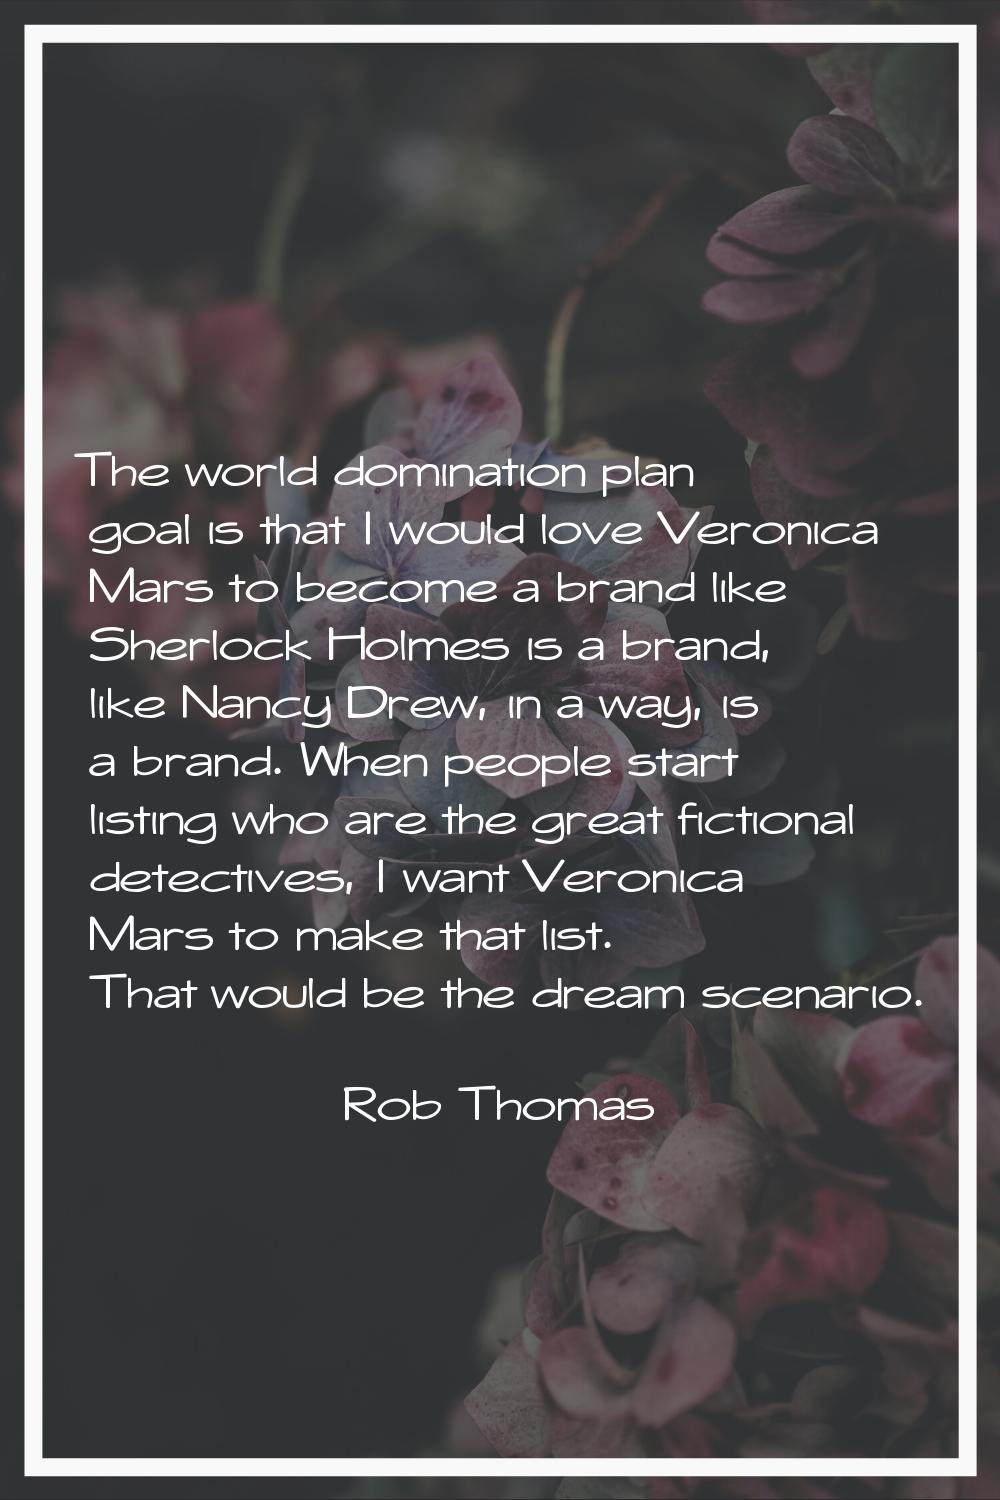 The world domination plan goal is that I would love Veronica Mars to become a brand like Sherlock H